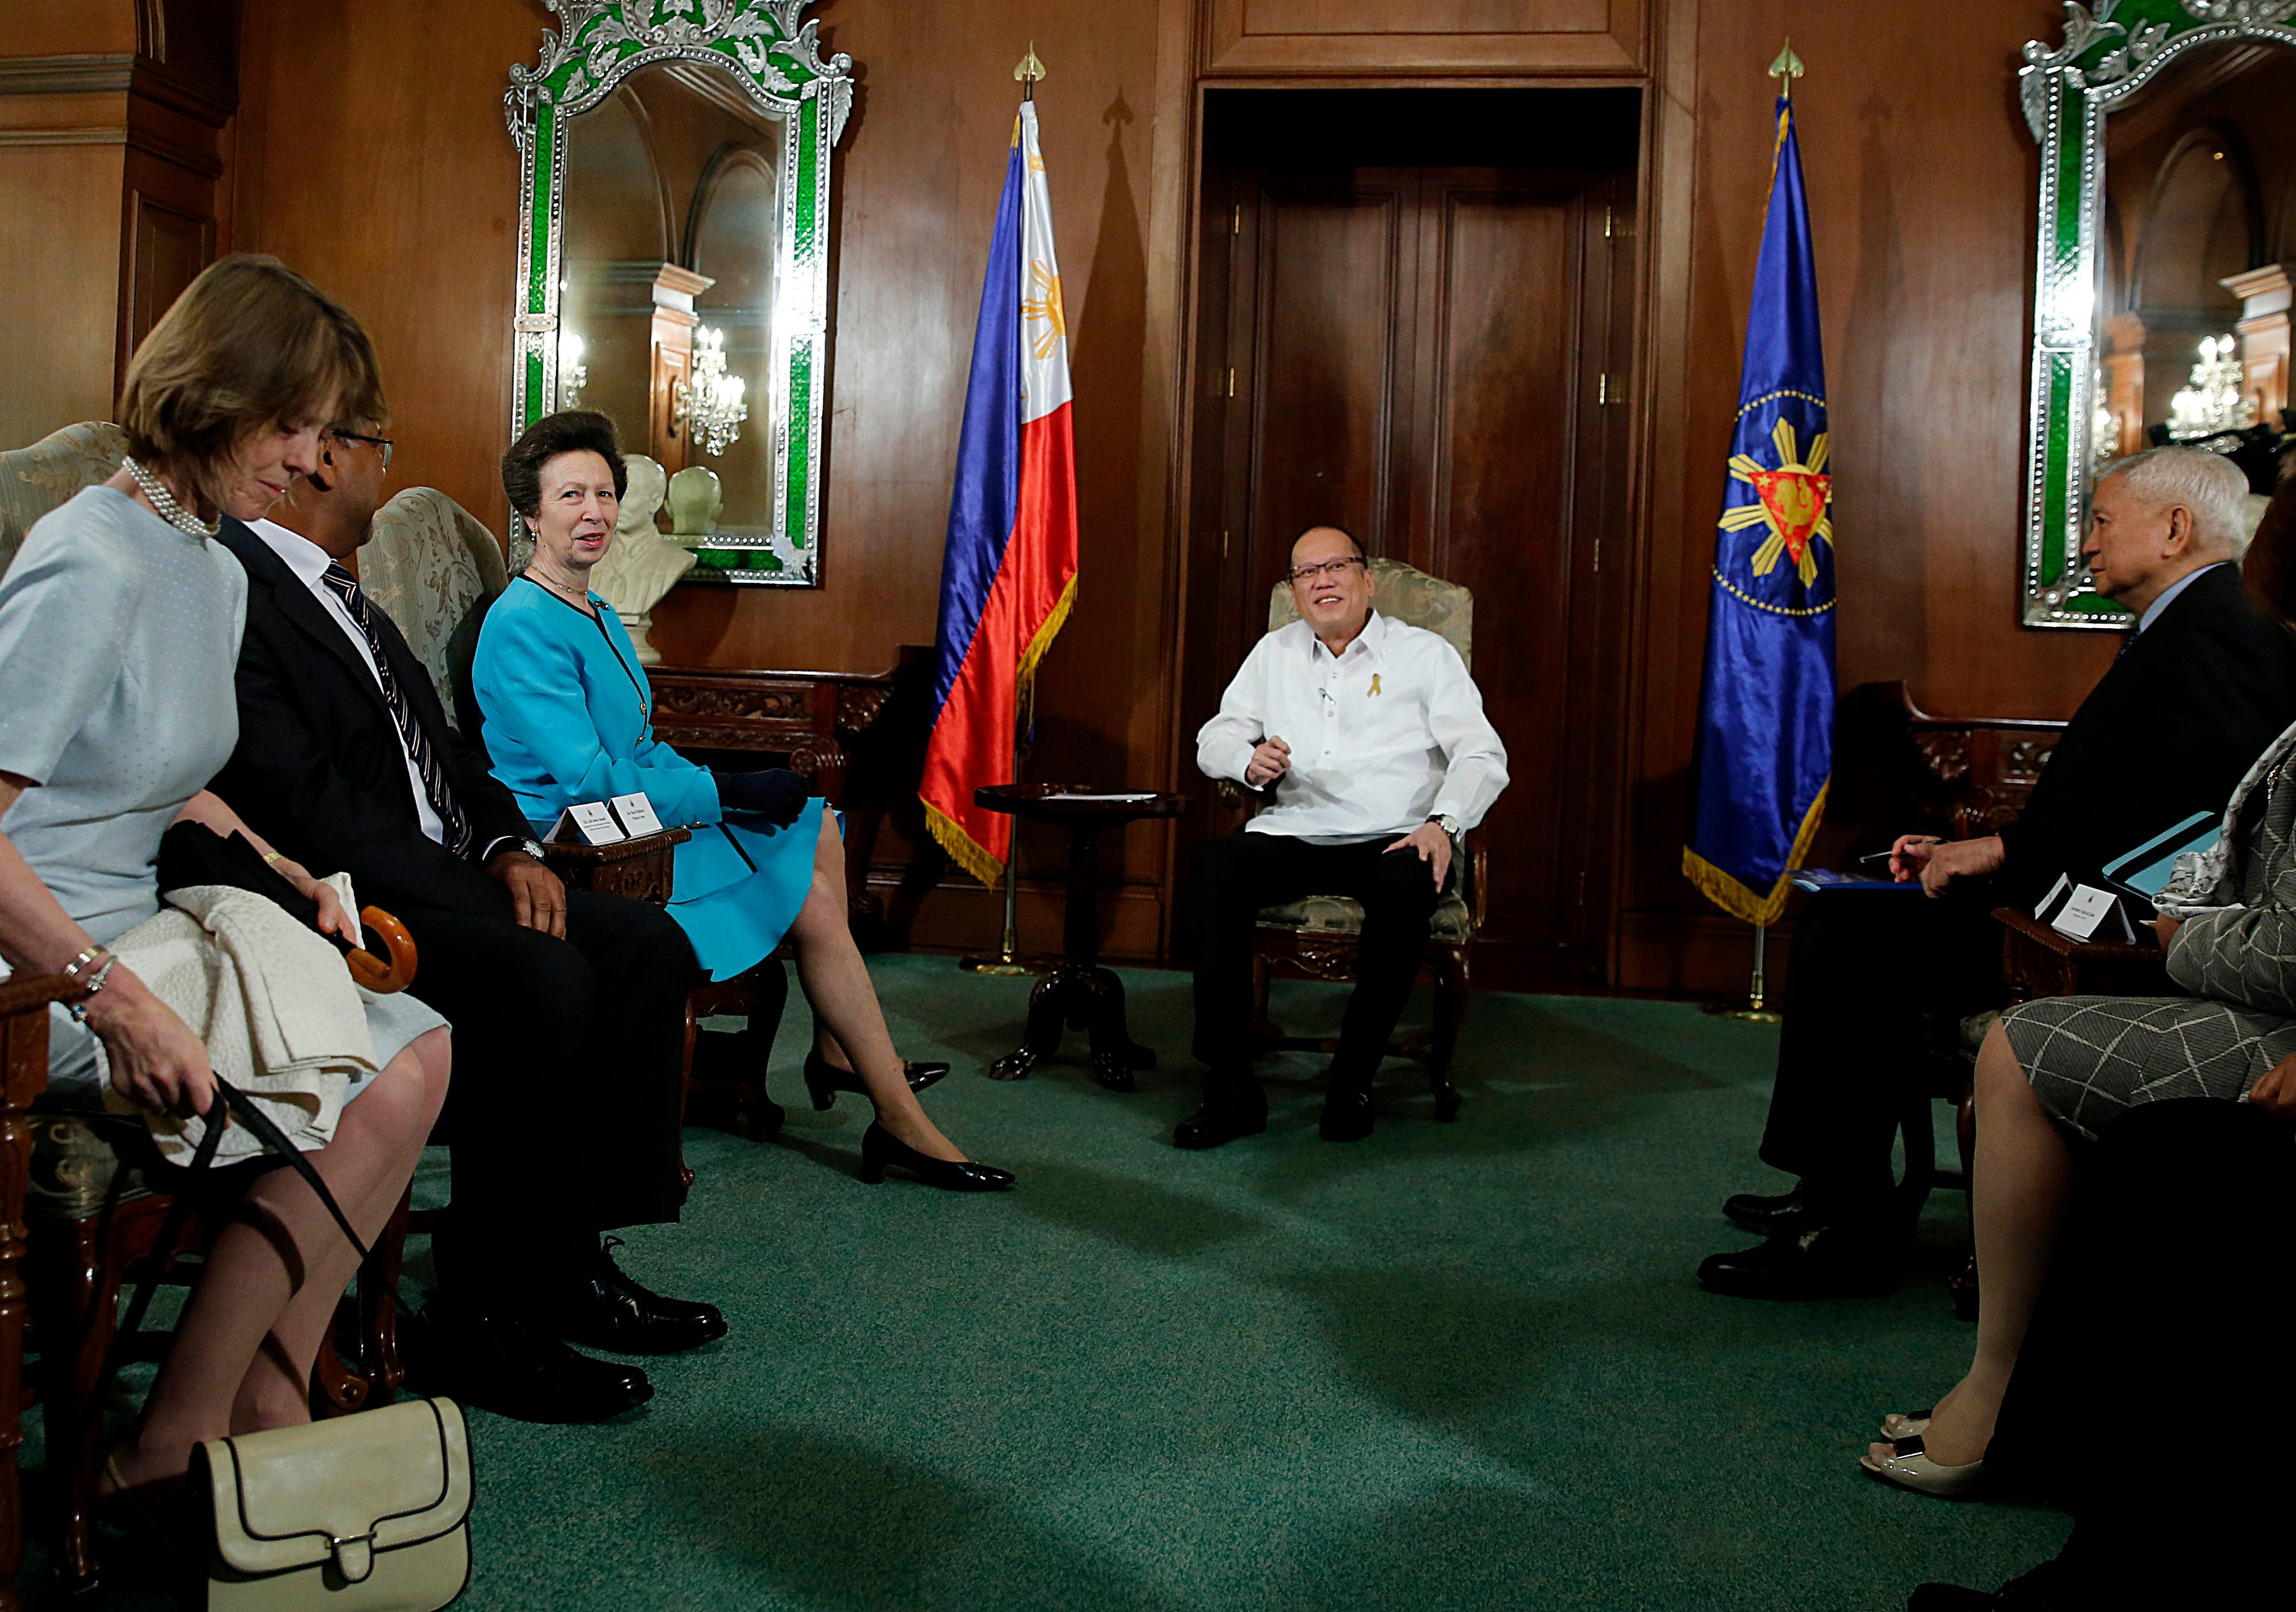 COURTESY CALL. President Benigno S. Aquino III exchanges pleasantries with Her Royal Highness Princess Anne during her courtesy call at the Music Room of the Malacañan Palace on Tuesday, March 17, 2015. Photo by Gil Nartea/Malacañang Photo Bureau 